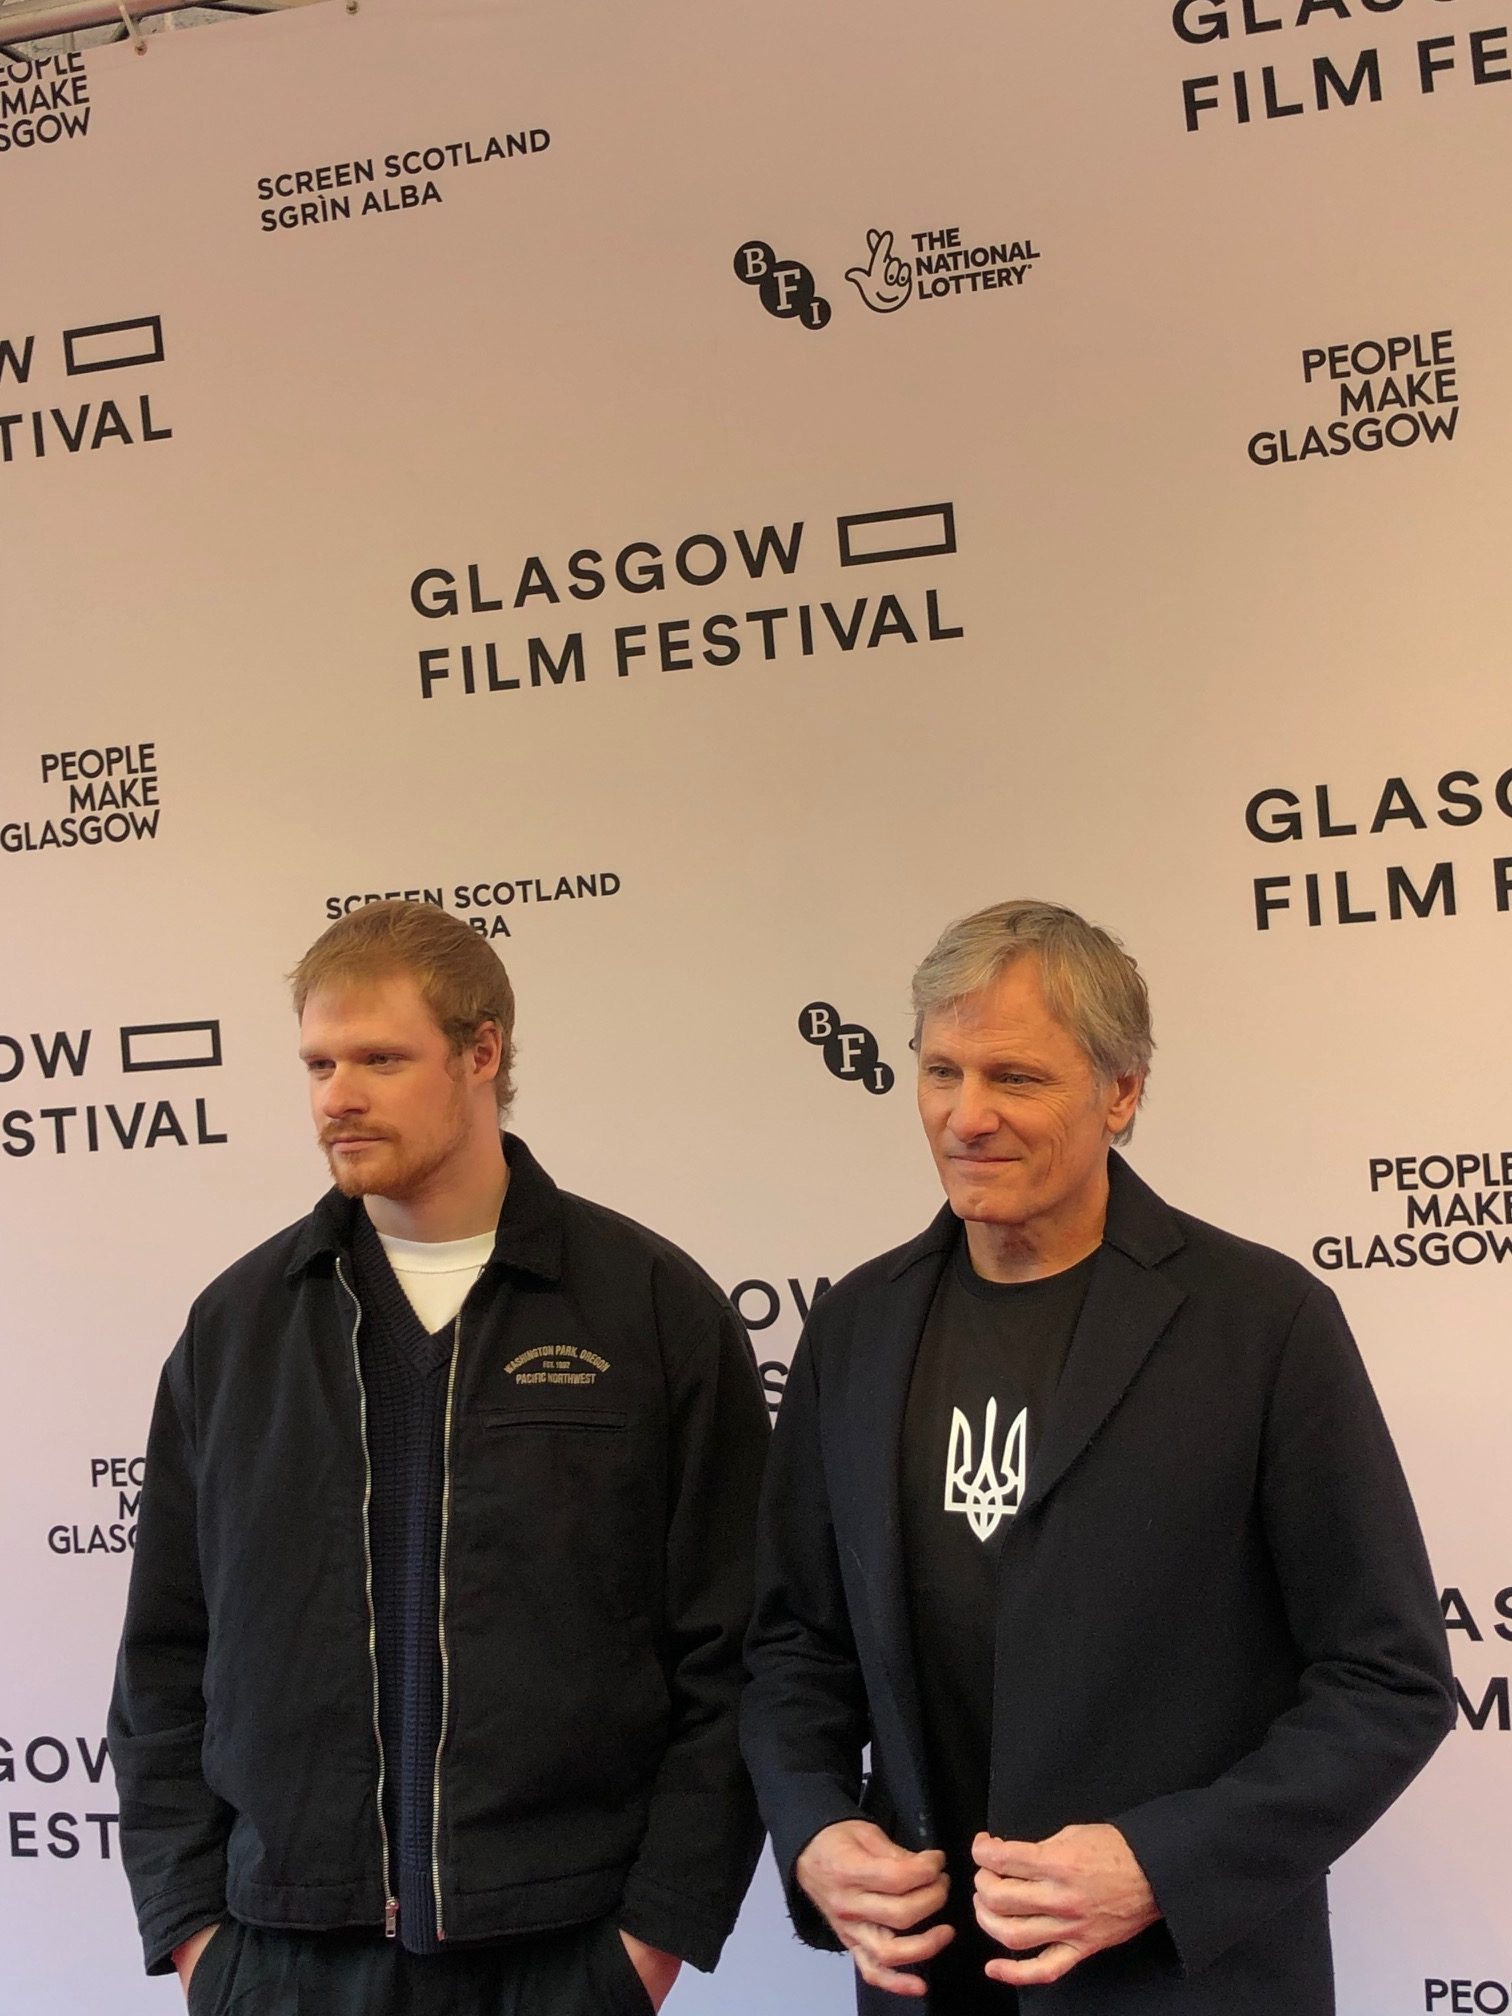 Viggo Mortensen and Solly McLeod on the red carpet at the UK premiere of The Dead Don’t Hurt